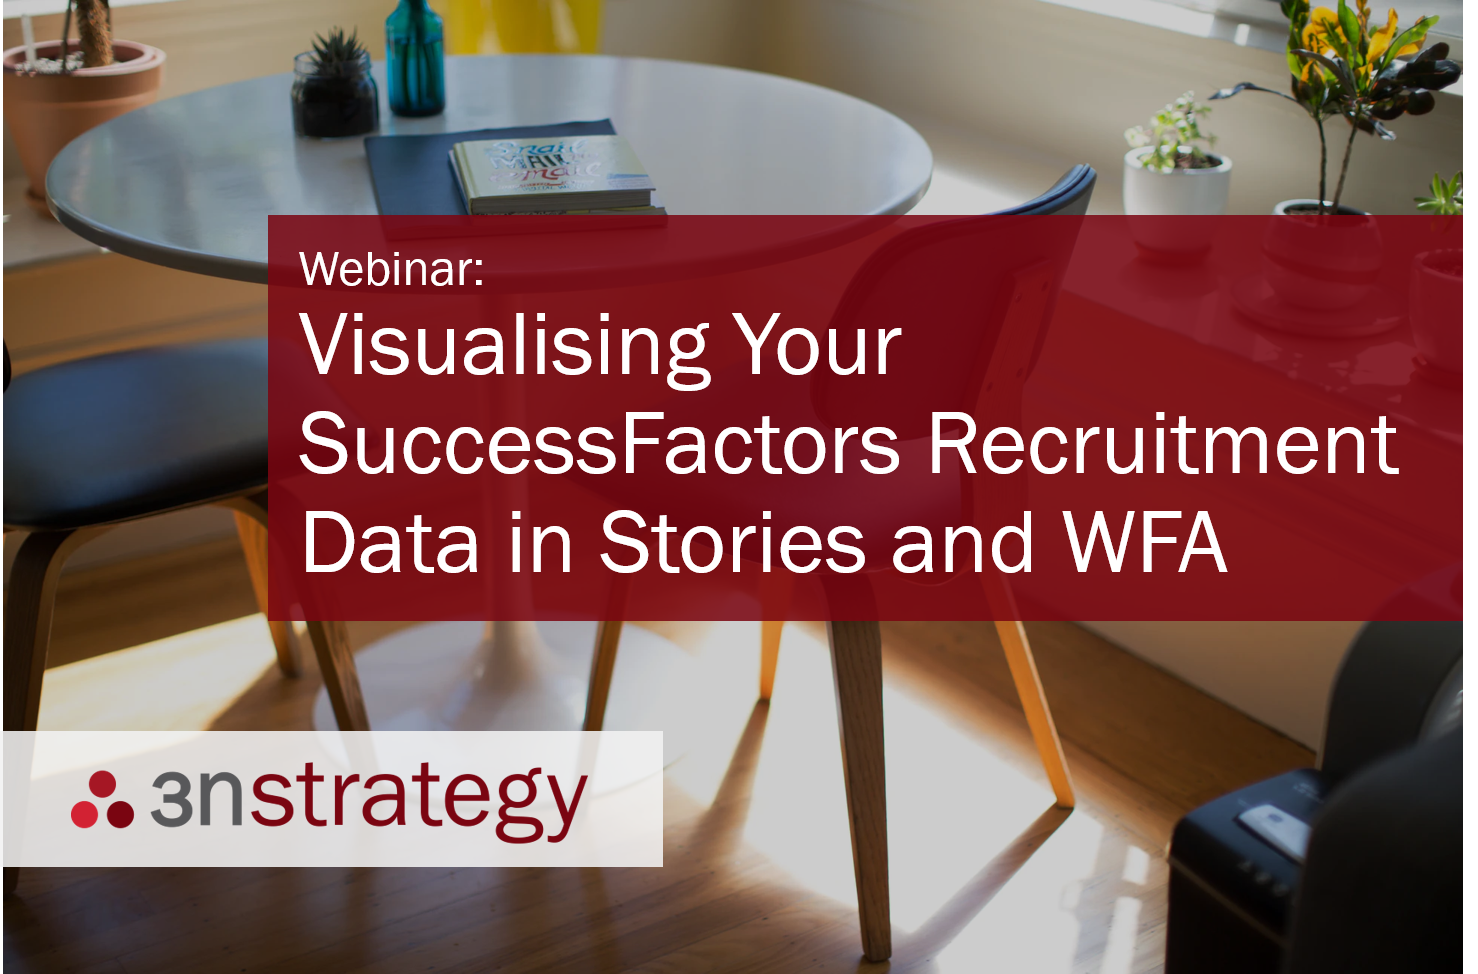 3n Strategy Visualising Your SuccessFactors Recruitment Data in Stories and WFA